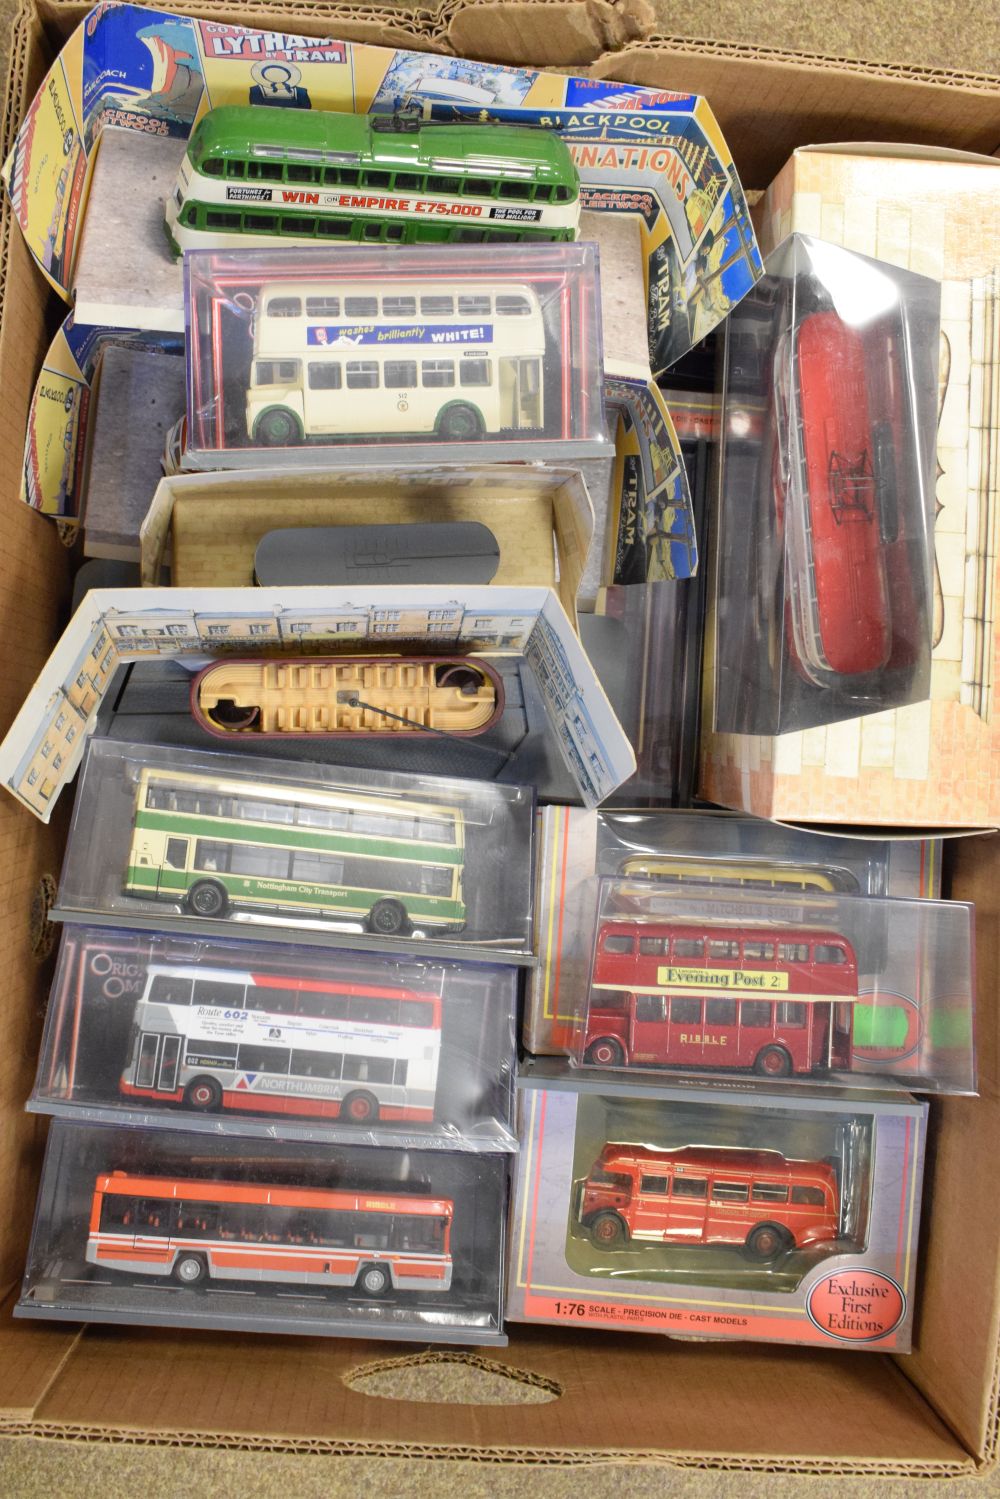 Quantity of Gilbow and Corgi 'The Original Omnibus Company' die-cast model buses, largely boxed - Image 2 of 6